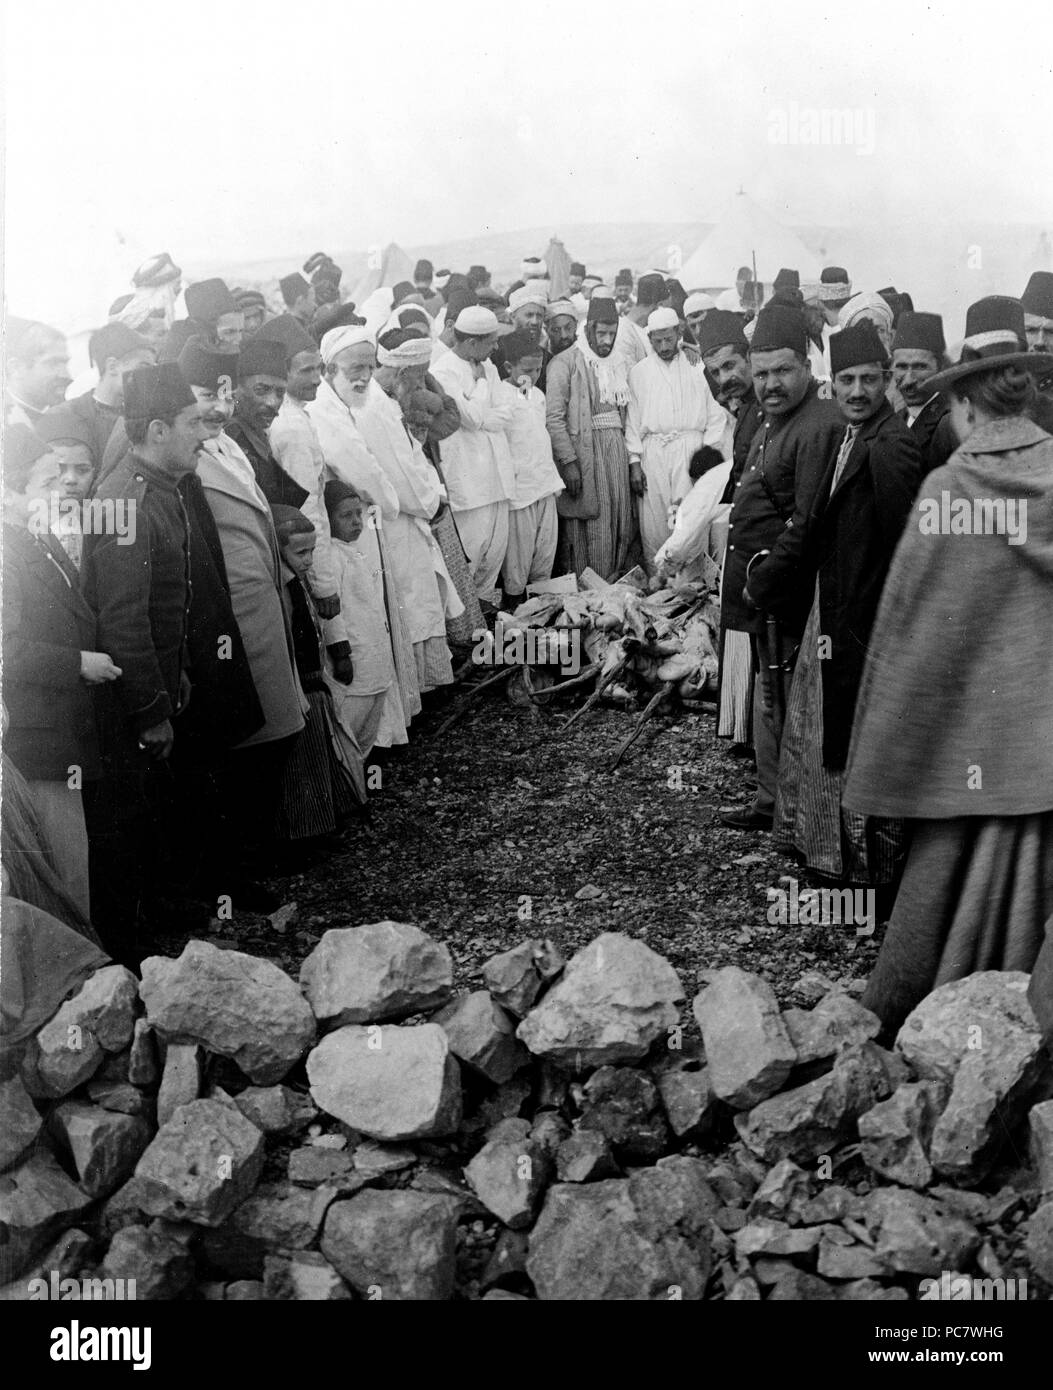 Samaritans around meat being cooked over open fire, Mount Gerizim, West Bank. Feast of the Passover 1880-1922 Stock Photo